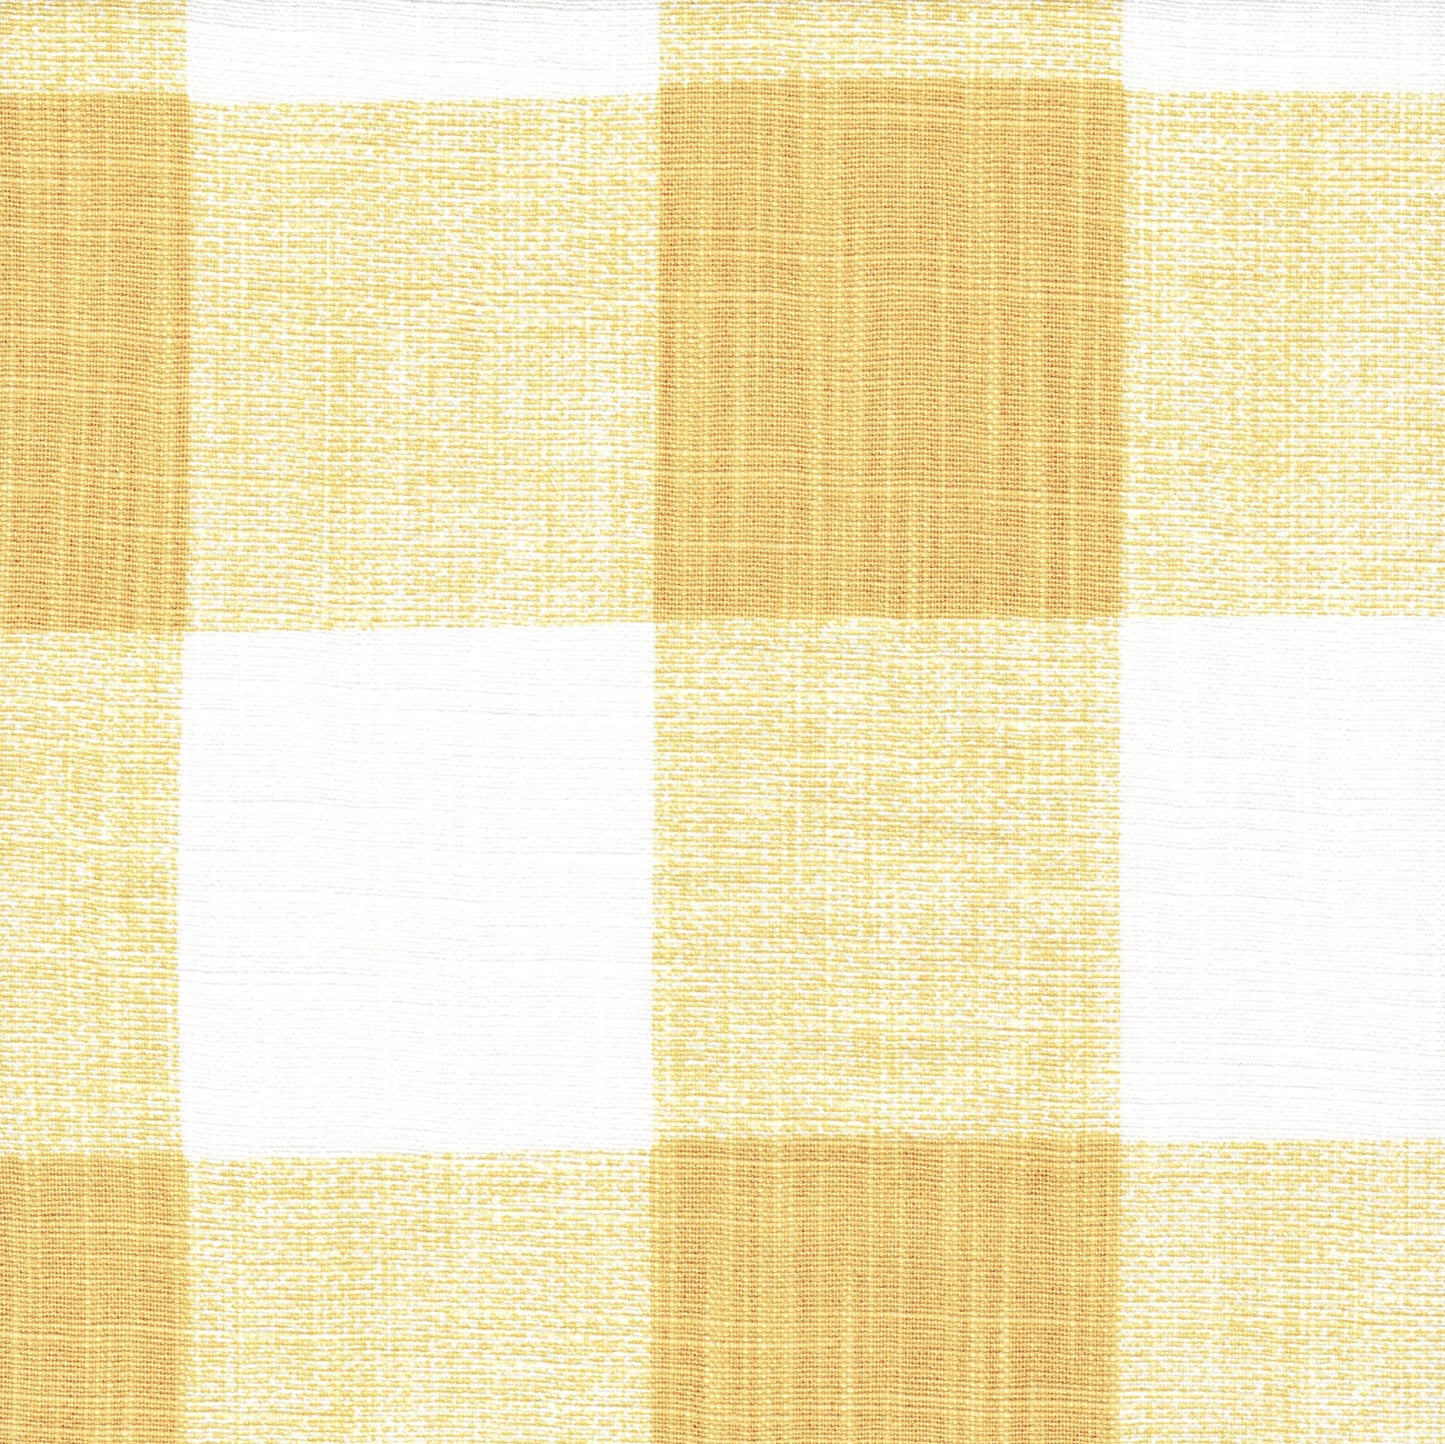 rod pocket curtains in anderson brazilian yellow buffalo check plaid